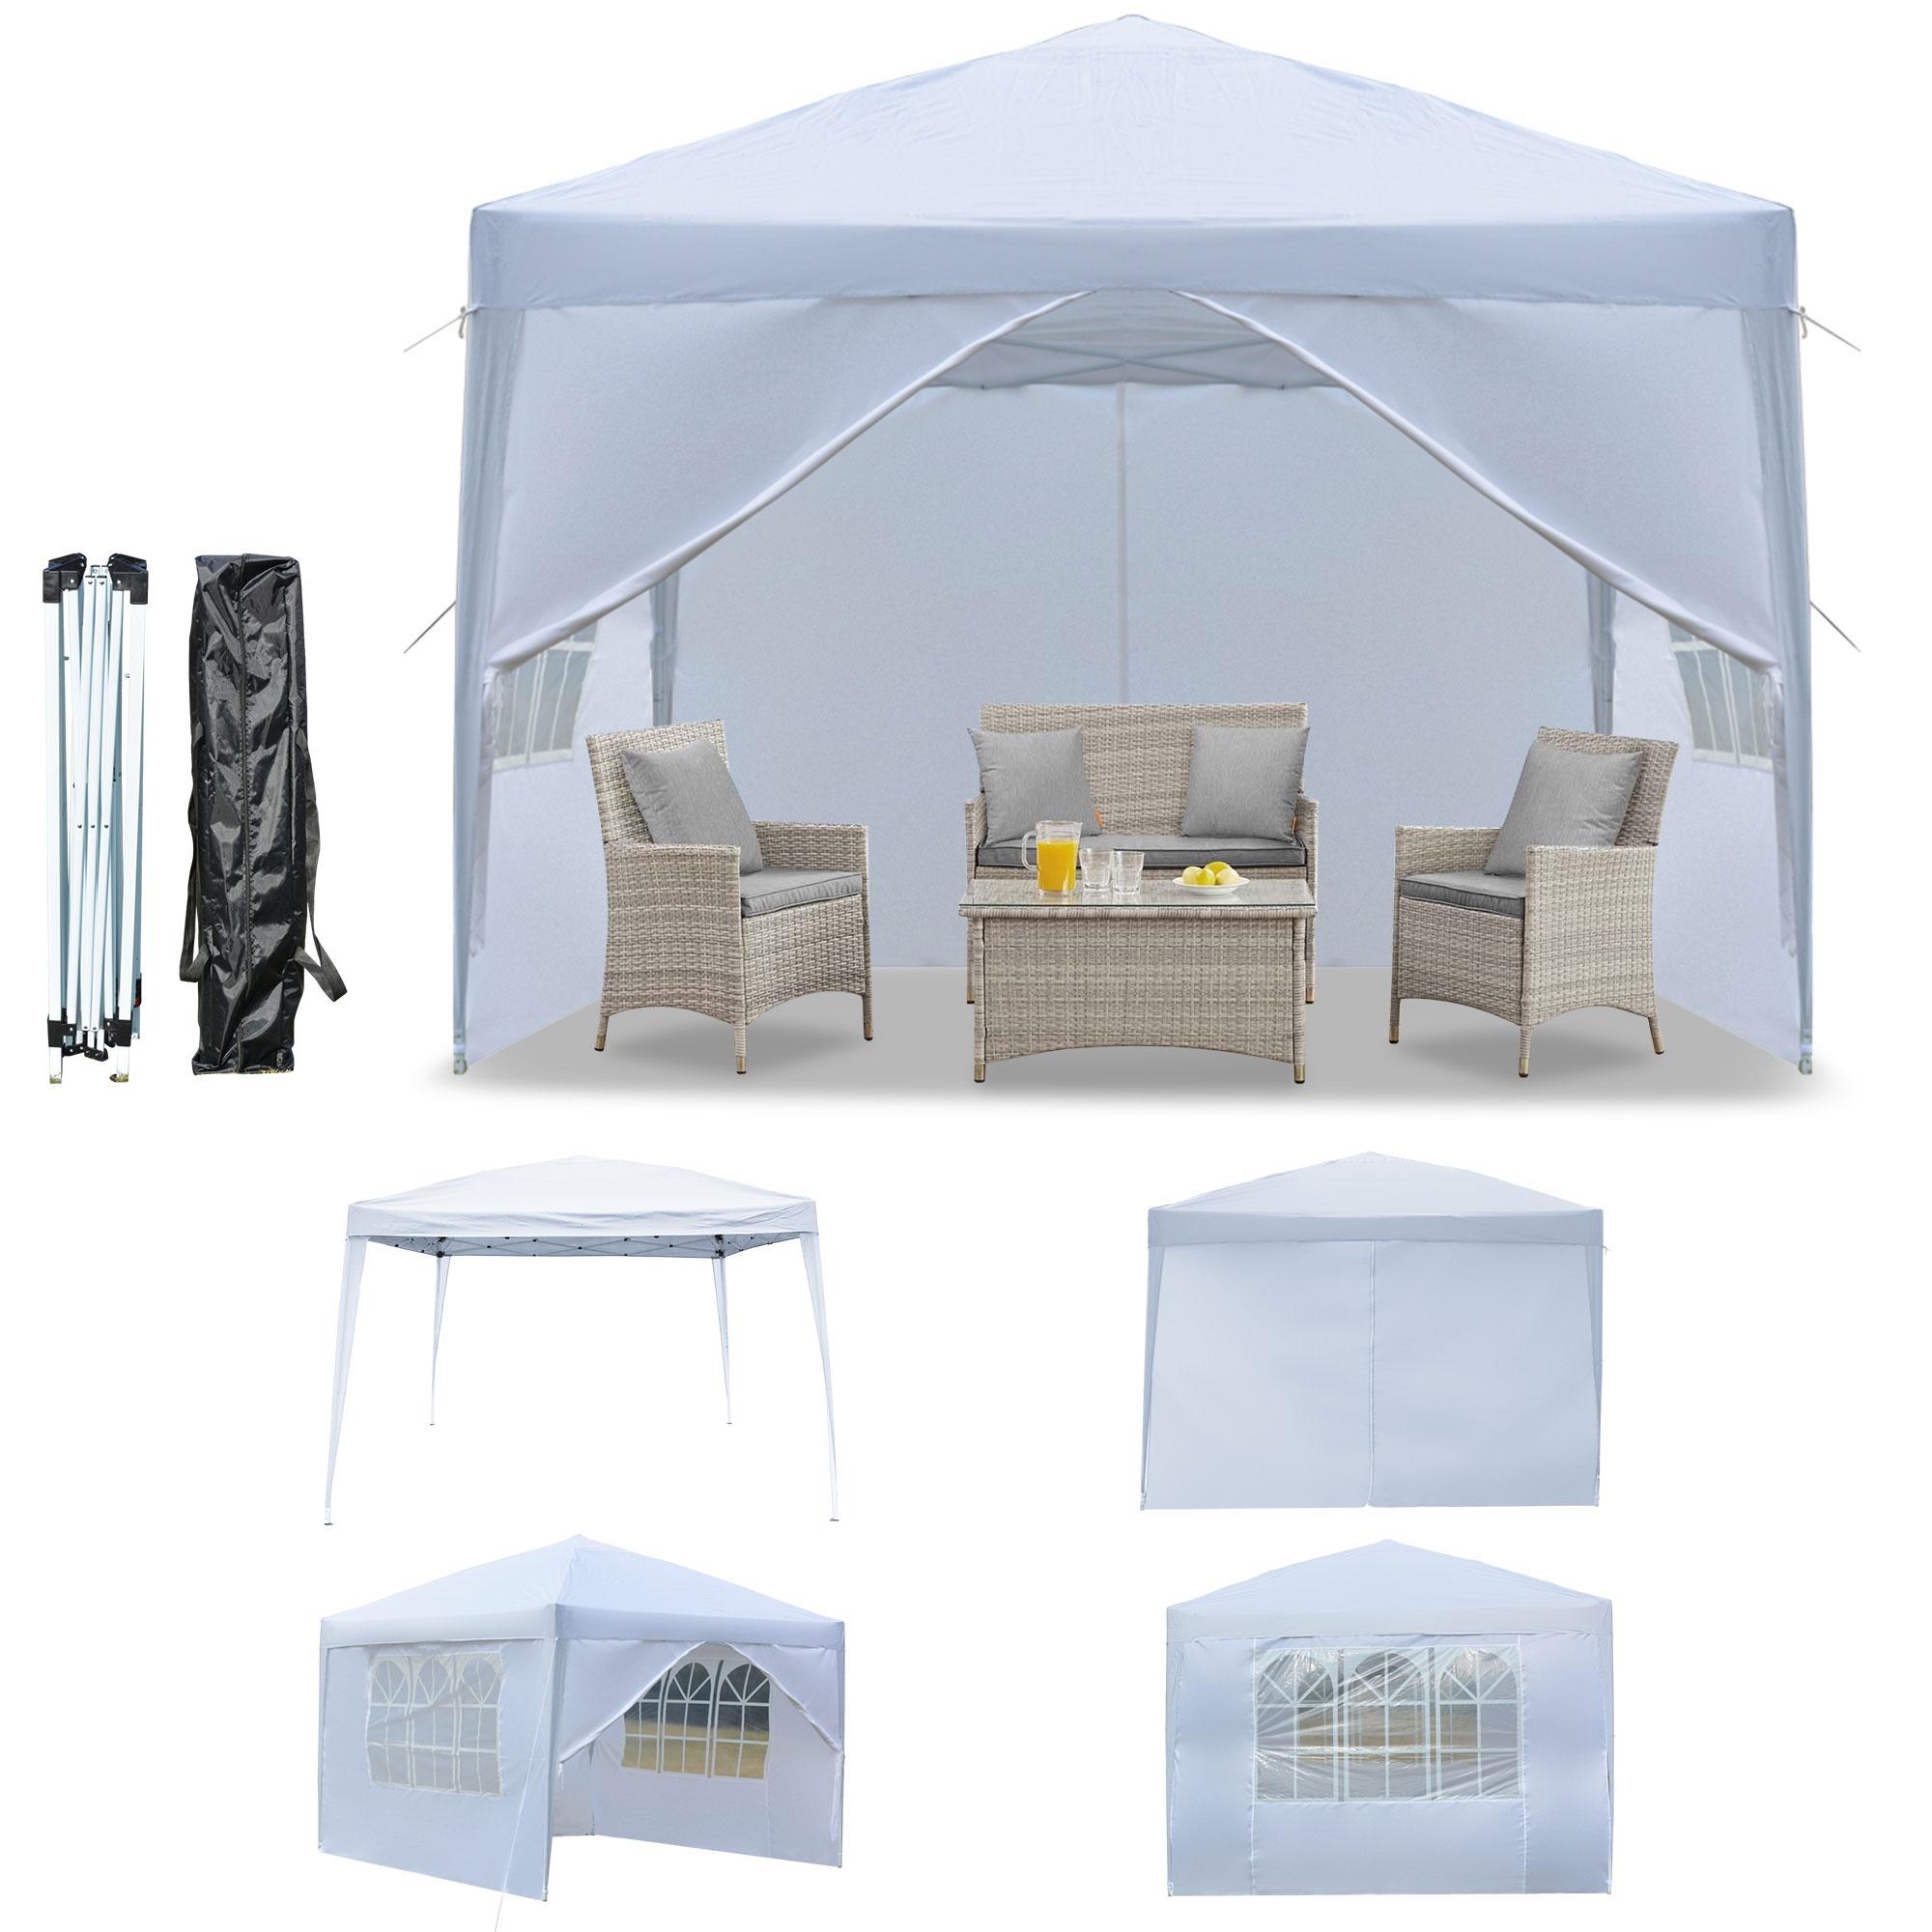 10'x10' Outdoor Wedding Party Tent with 4 Sidewalls, SEGMART Pop Up Canopy Tent with 3 Adjustable Heights, Portable Waterproof Instant Patio Gazebo Tent with Carrying Bag for Garden Pavilion - image 1 of 9